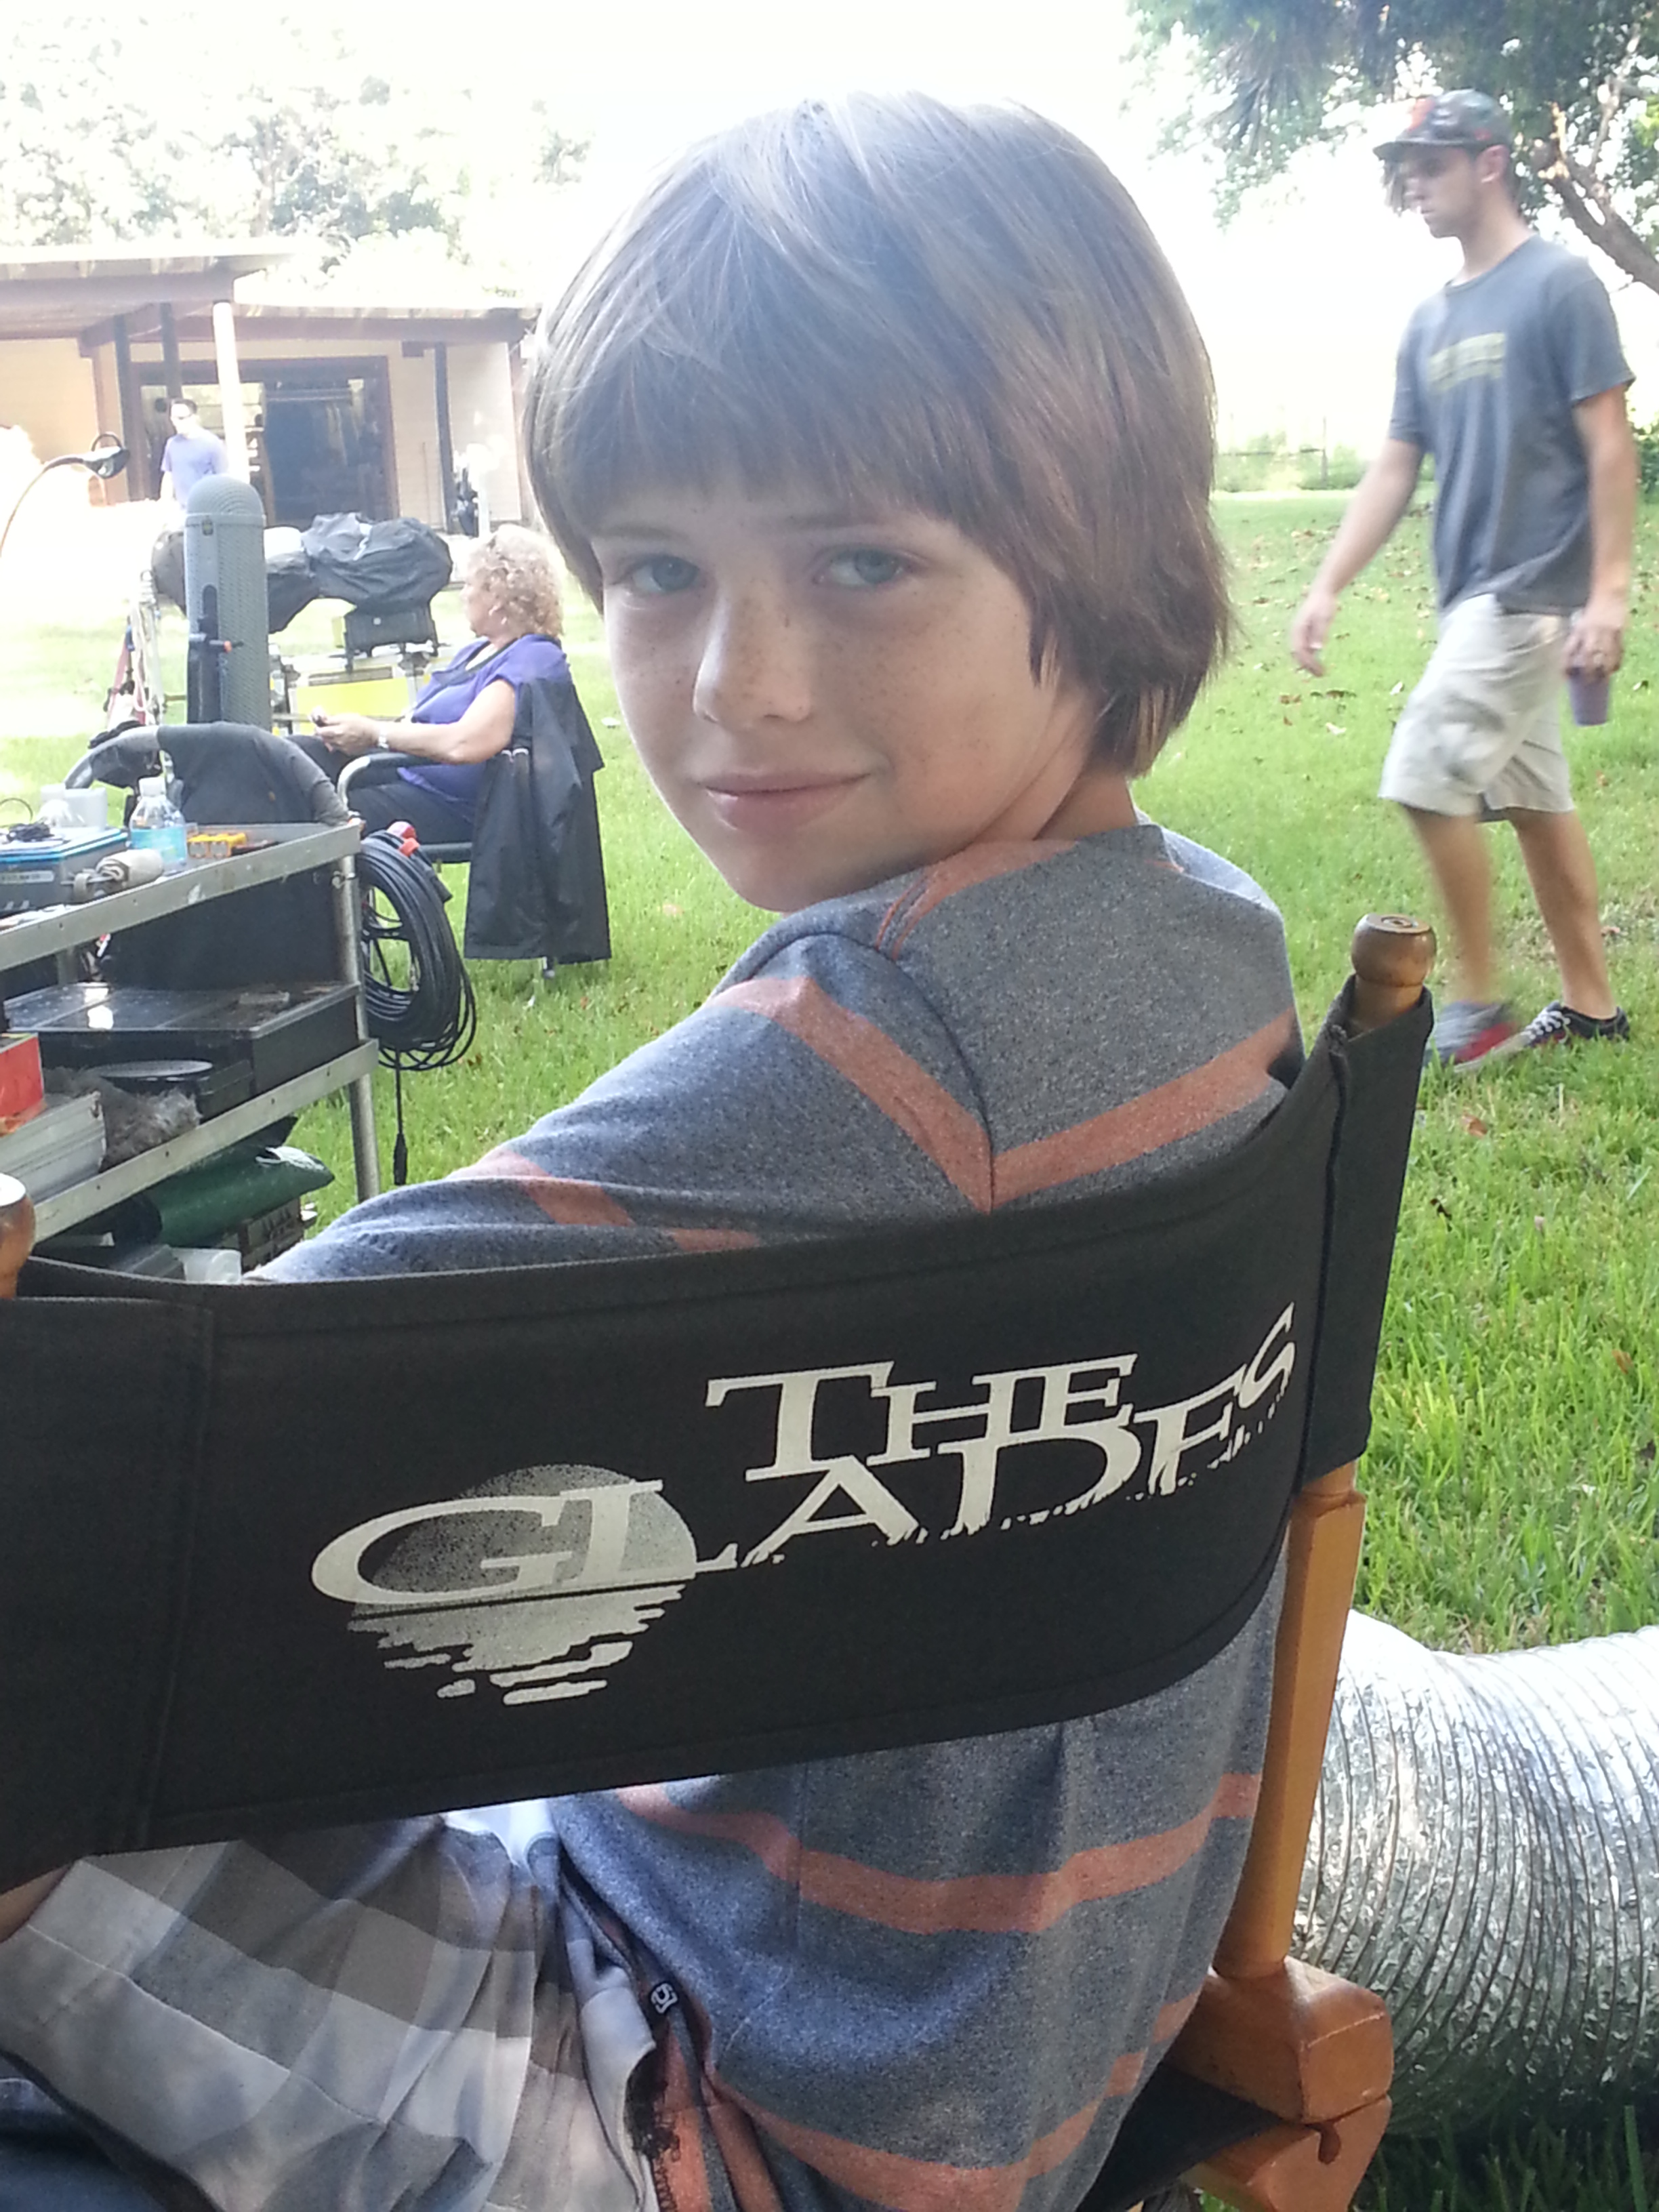 On set of 'The Glades'